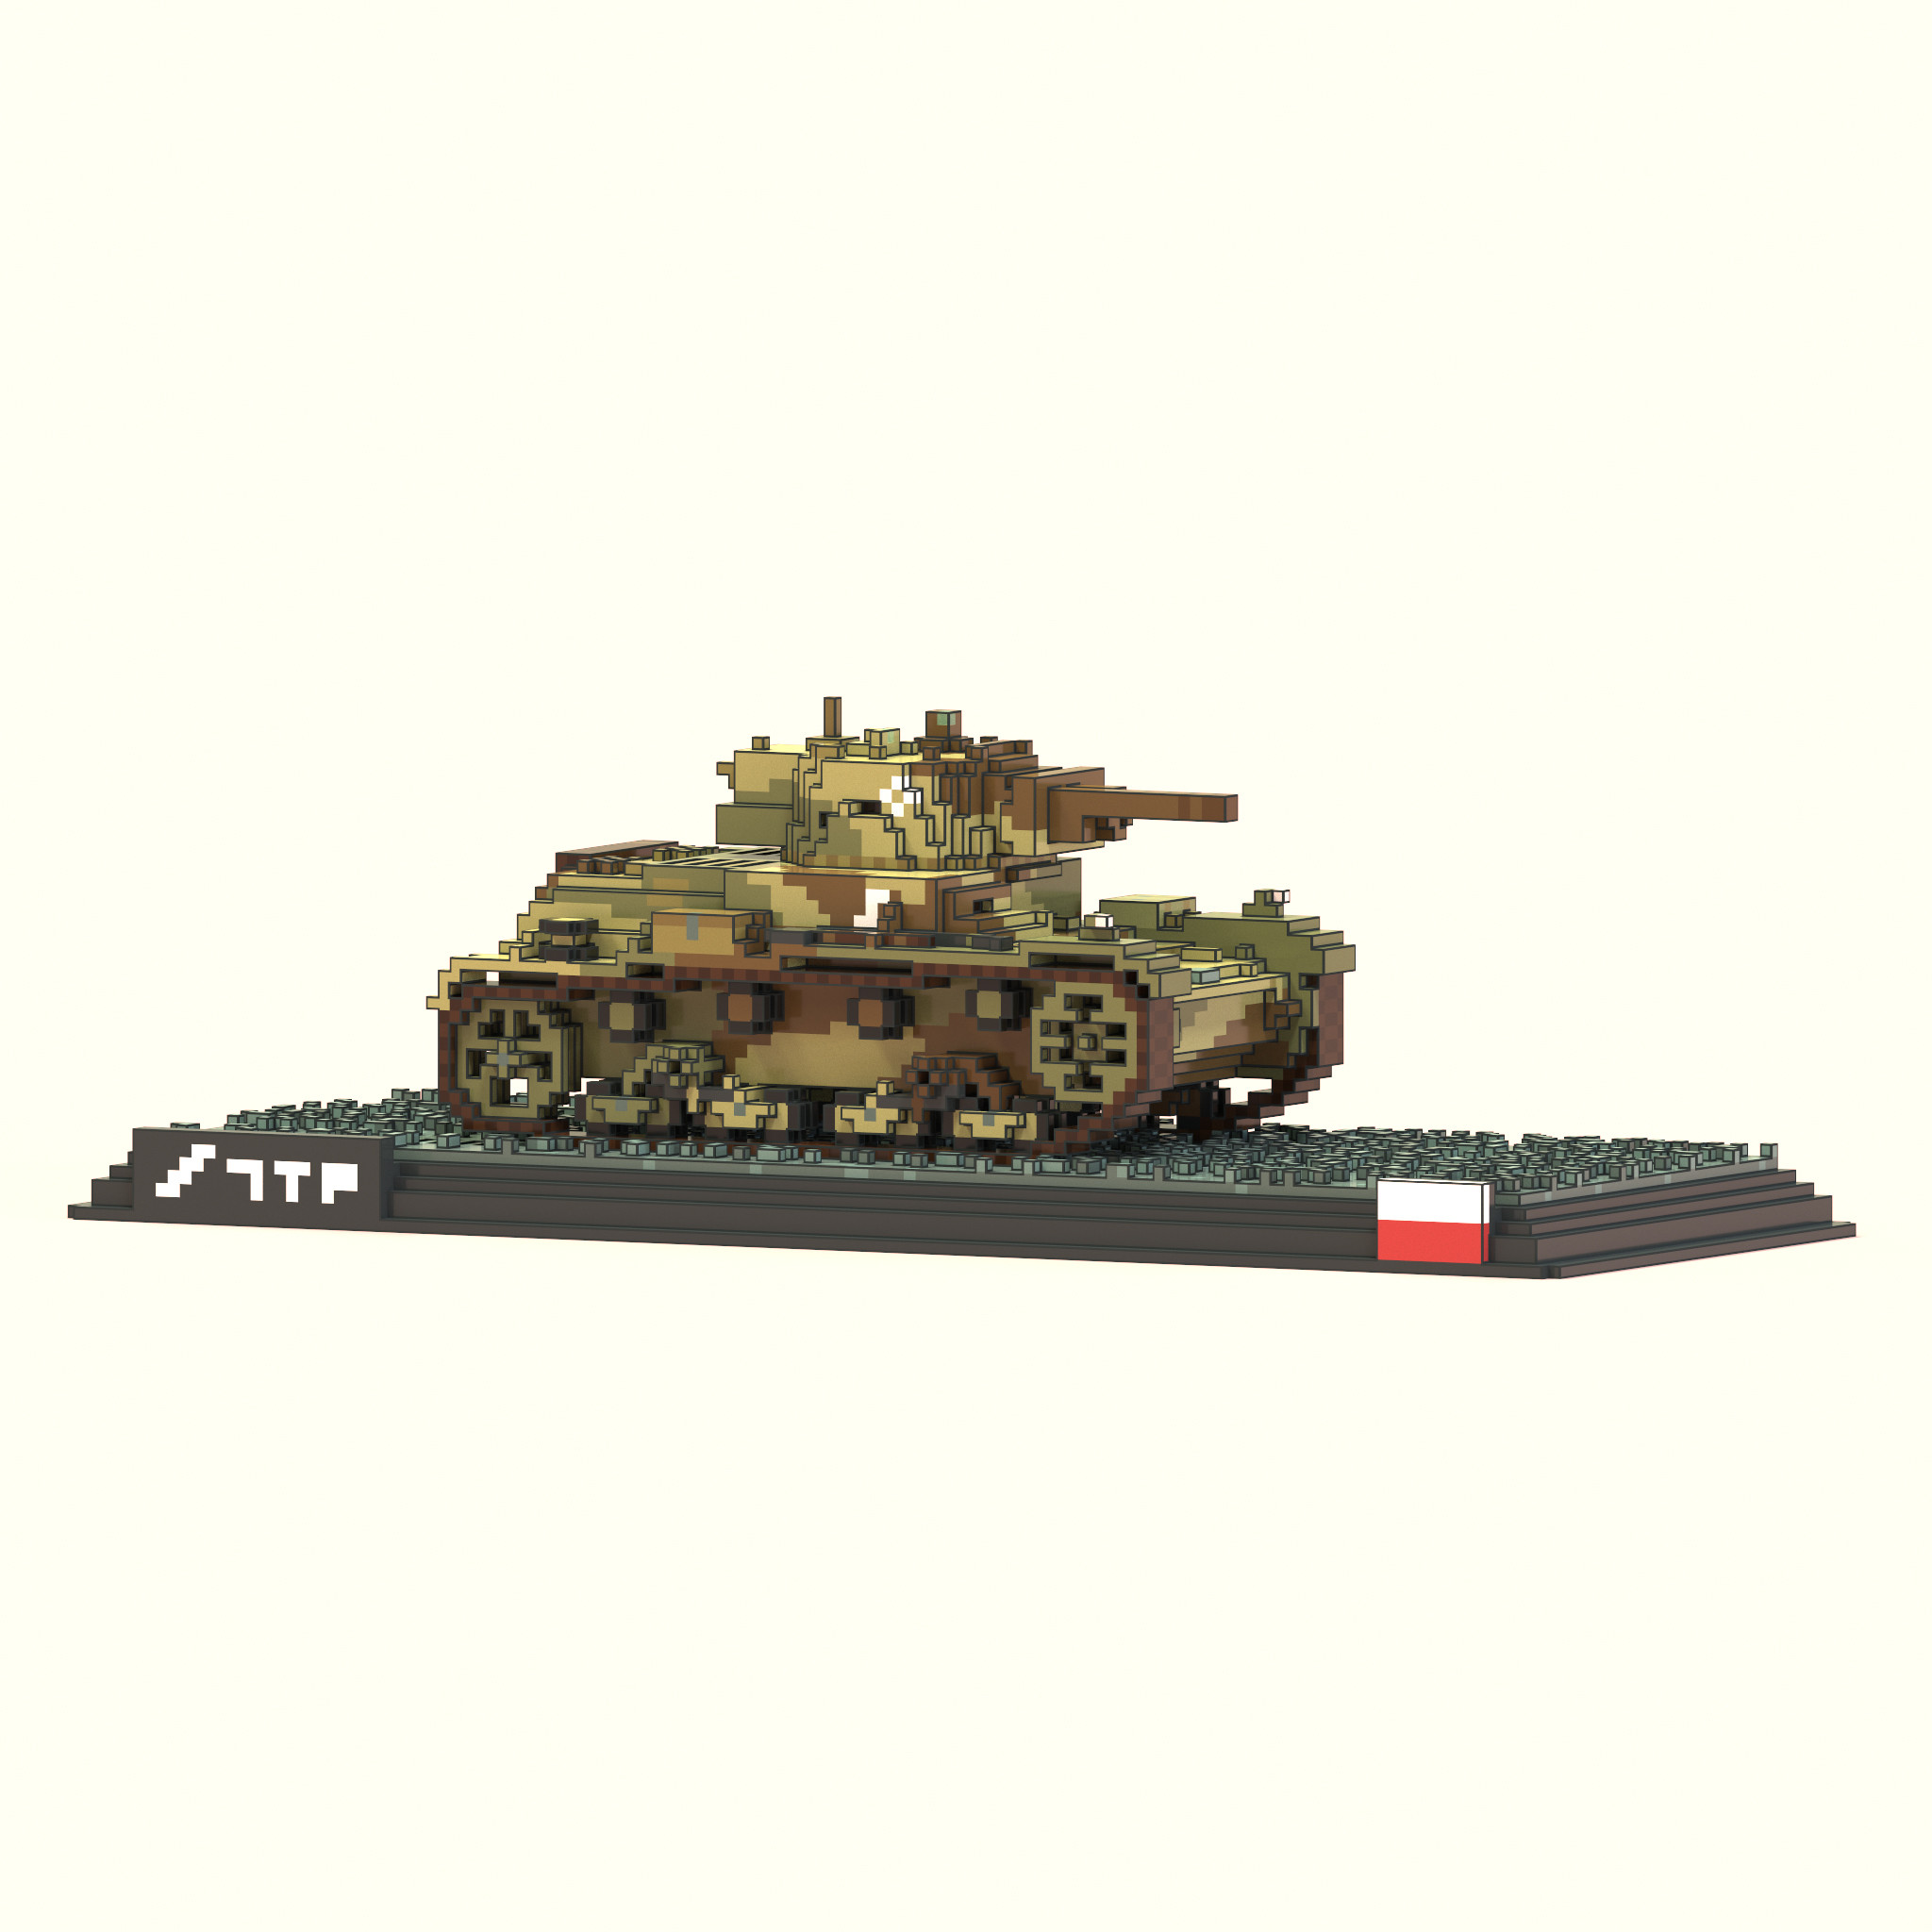 Side profile of the unboxed 7TP tank resting atop a "die-cast" base.